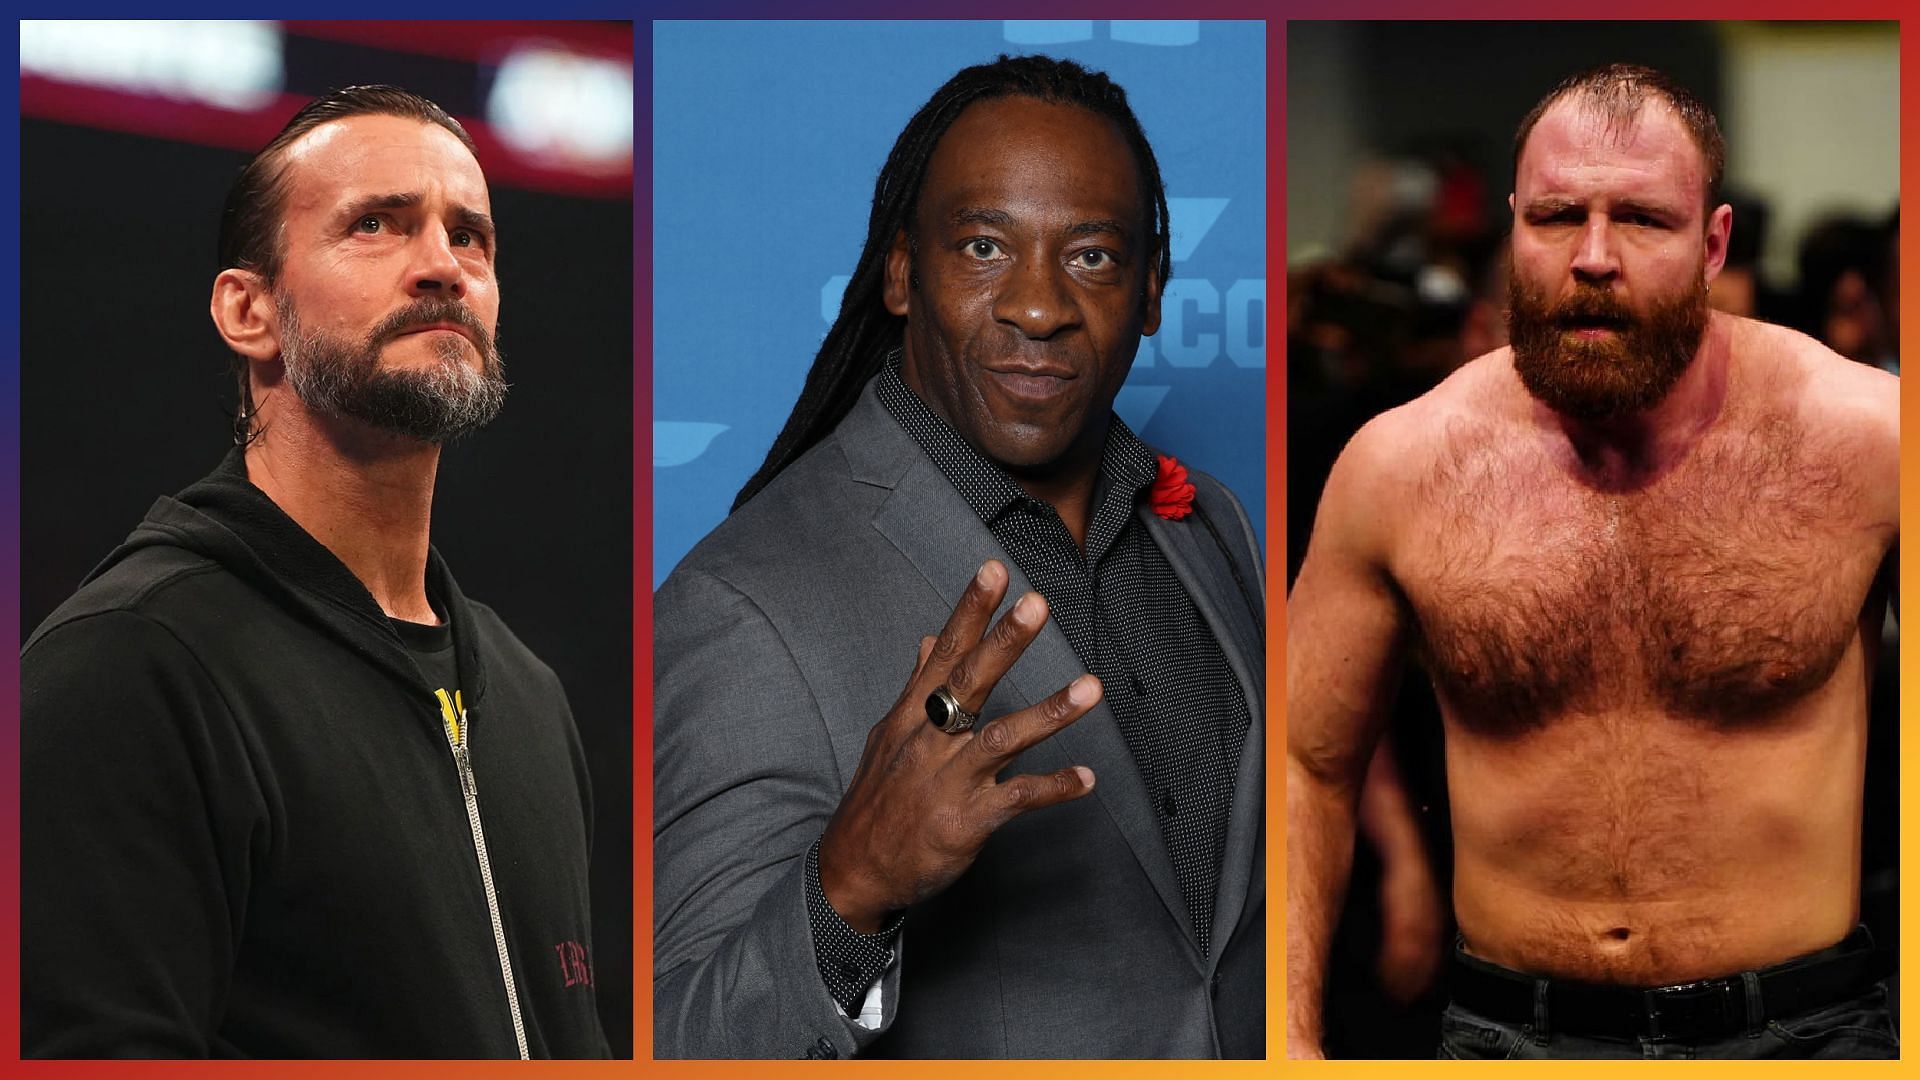 WWE Hall of Famer Booker T calls CM Punk burying Jon Moxley on Instagram a "childish thing"